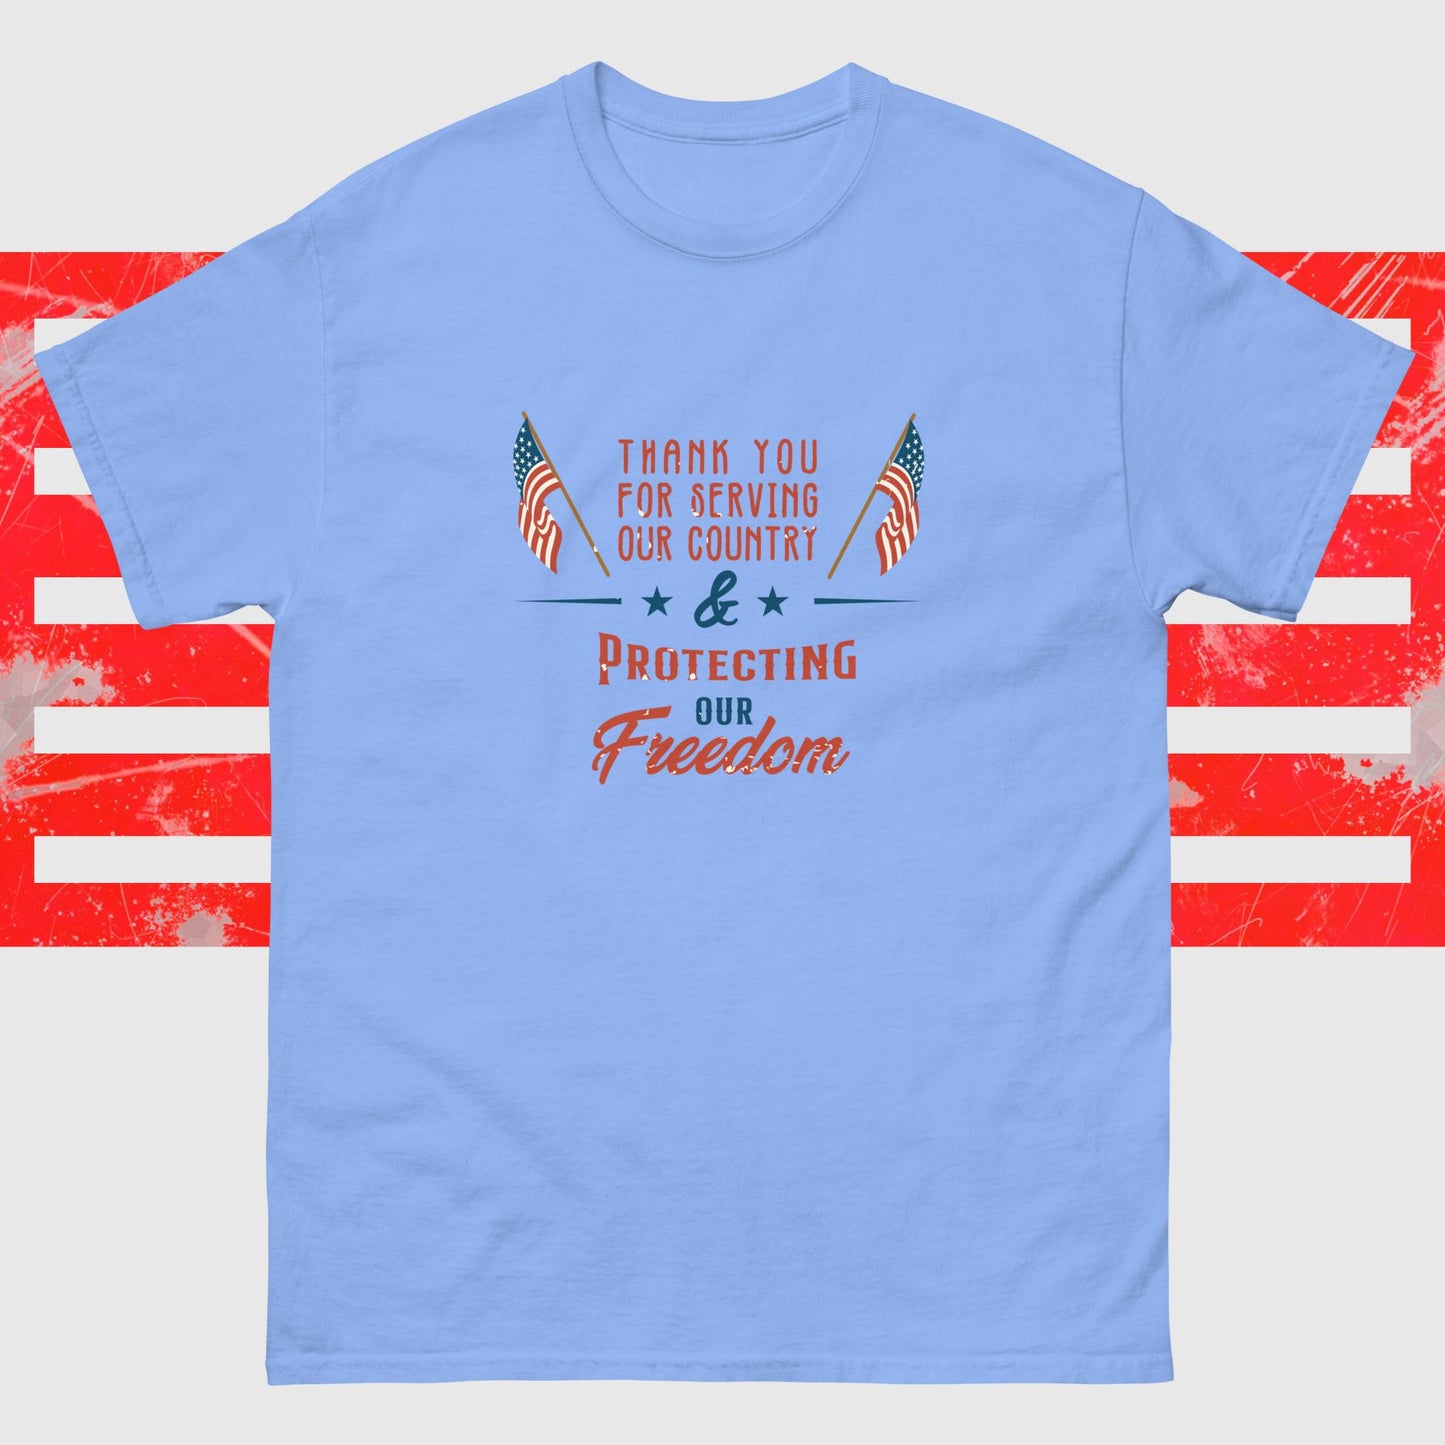 PATRIOTIC TEE FOR VETERANS DAY PROTECTING FREEDOM CAROLINA BLUE FRONT - www.firstamericanstore.com